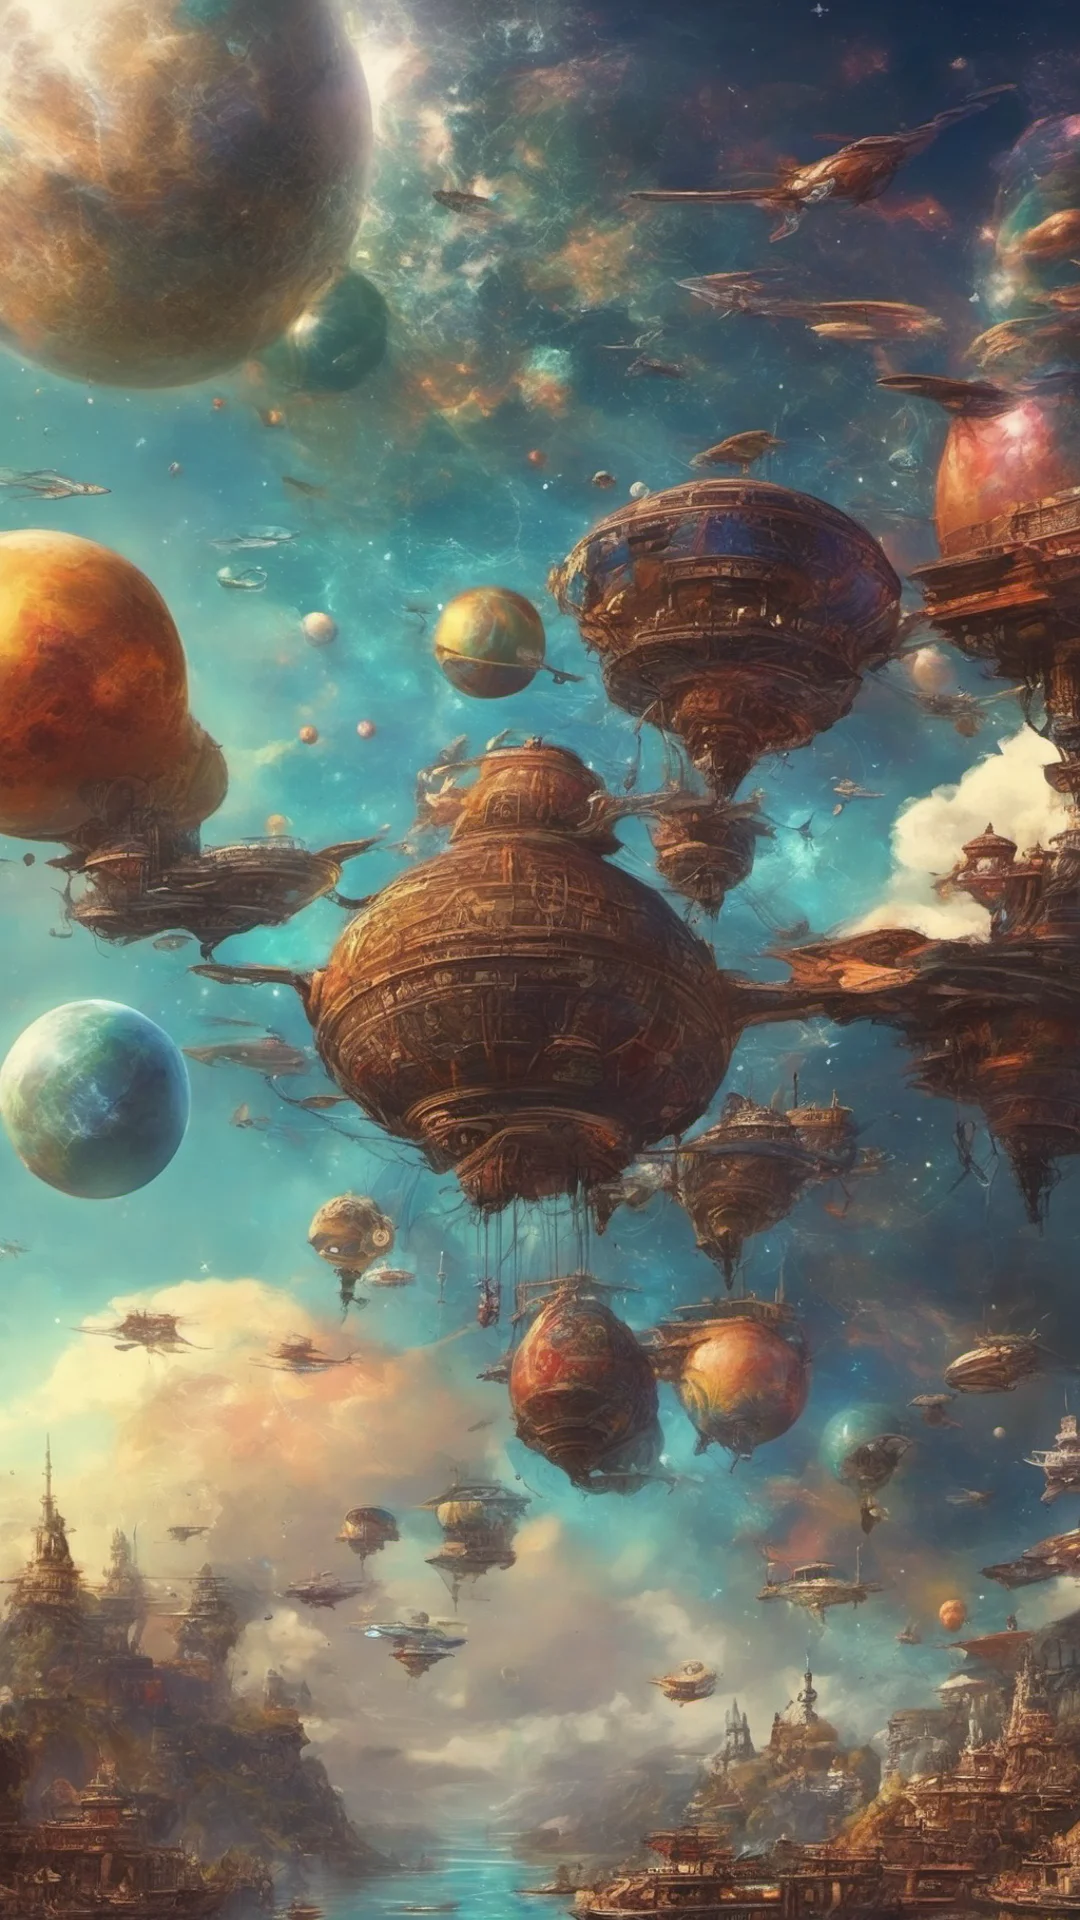 aistart sky planets galaxies flying airships futuristic colorful world sci fi epic fantasy  amazing awesome portrait 2 tall